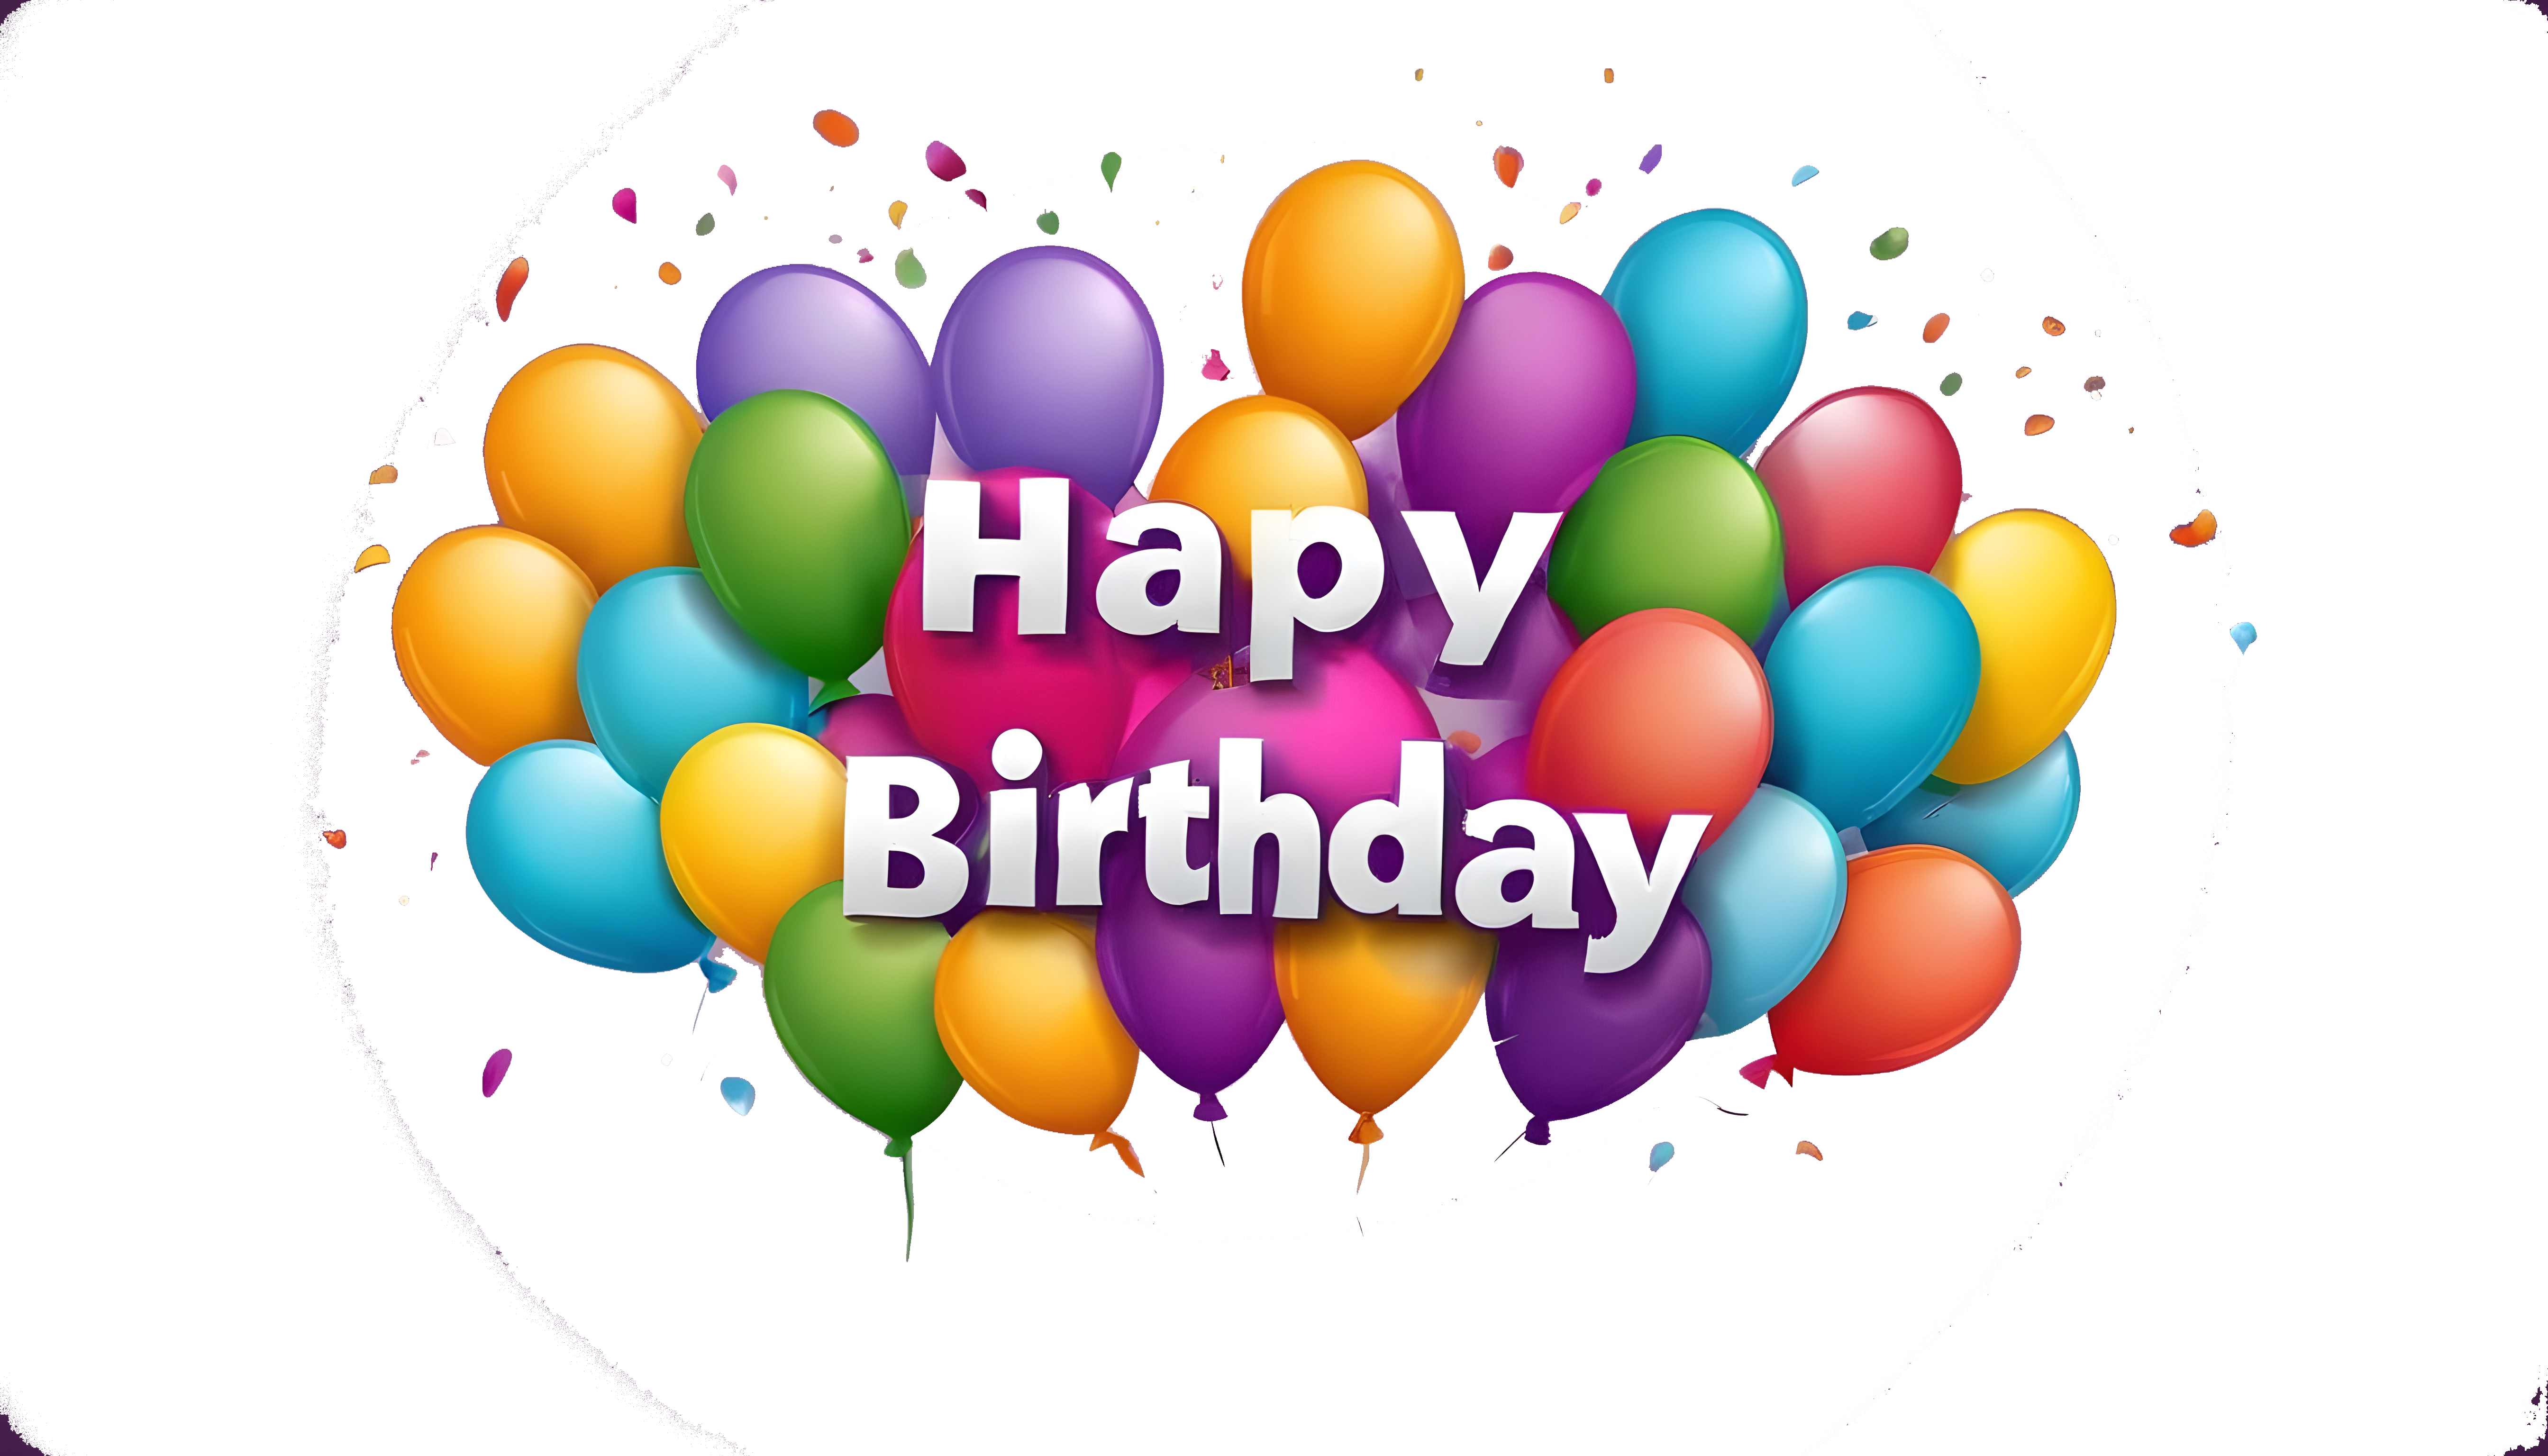 Free PNG Download: Happy Birthday Text with Balloons